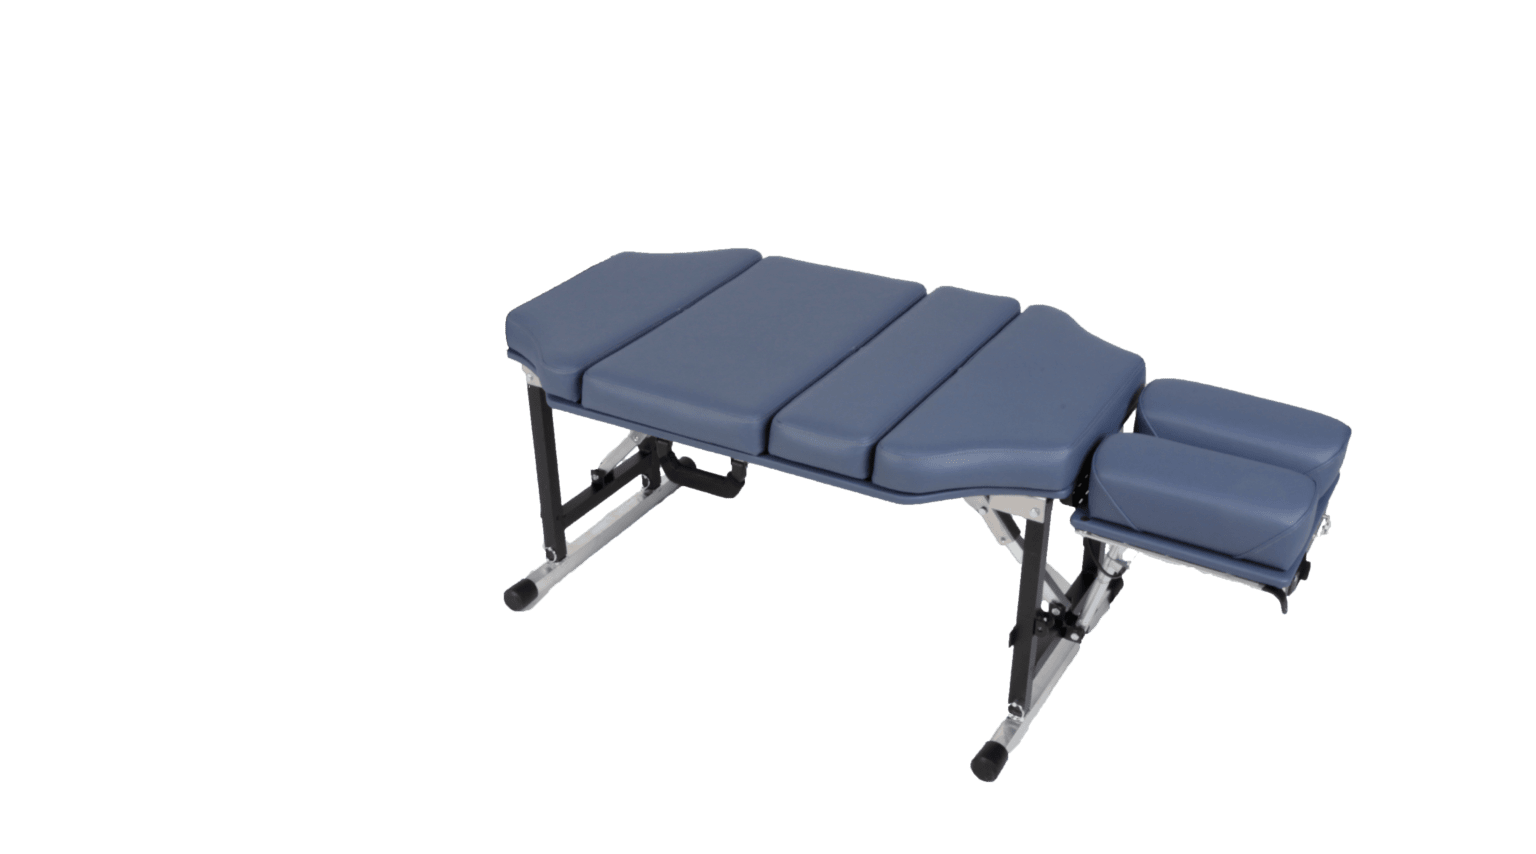 Blue Lifetimer International LT-500 portable pediatric table is a portable table designed for chiropractic, massage, and examination services for children.